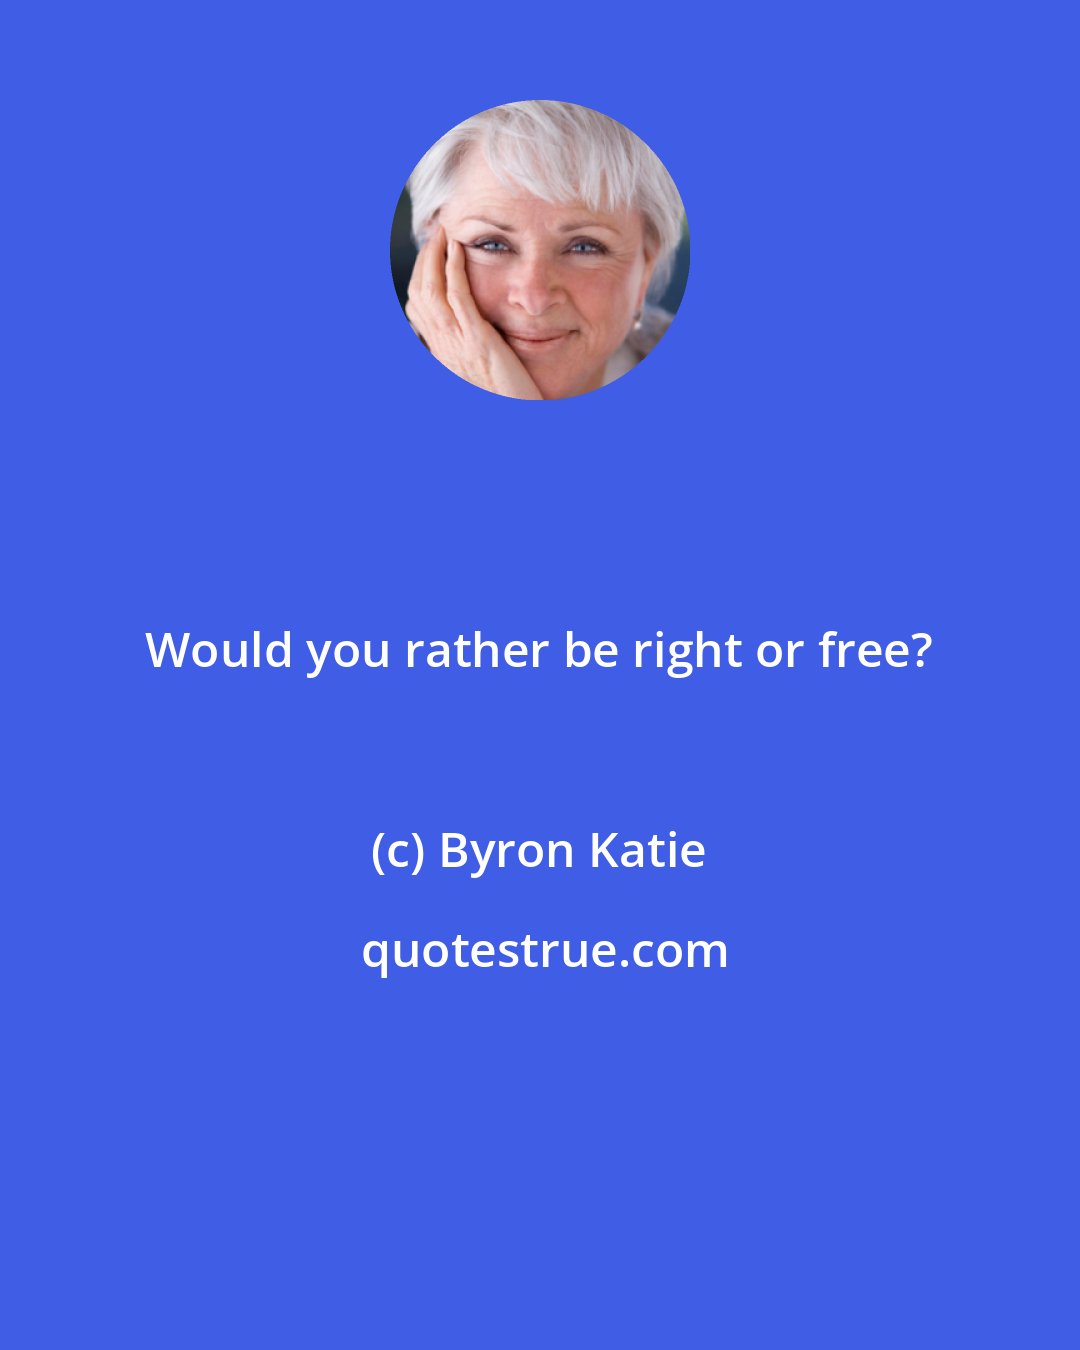 Byron Katie: Would you rather be right or free?